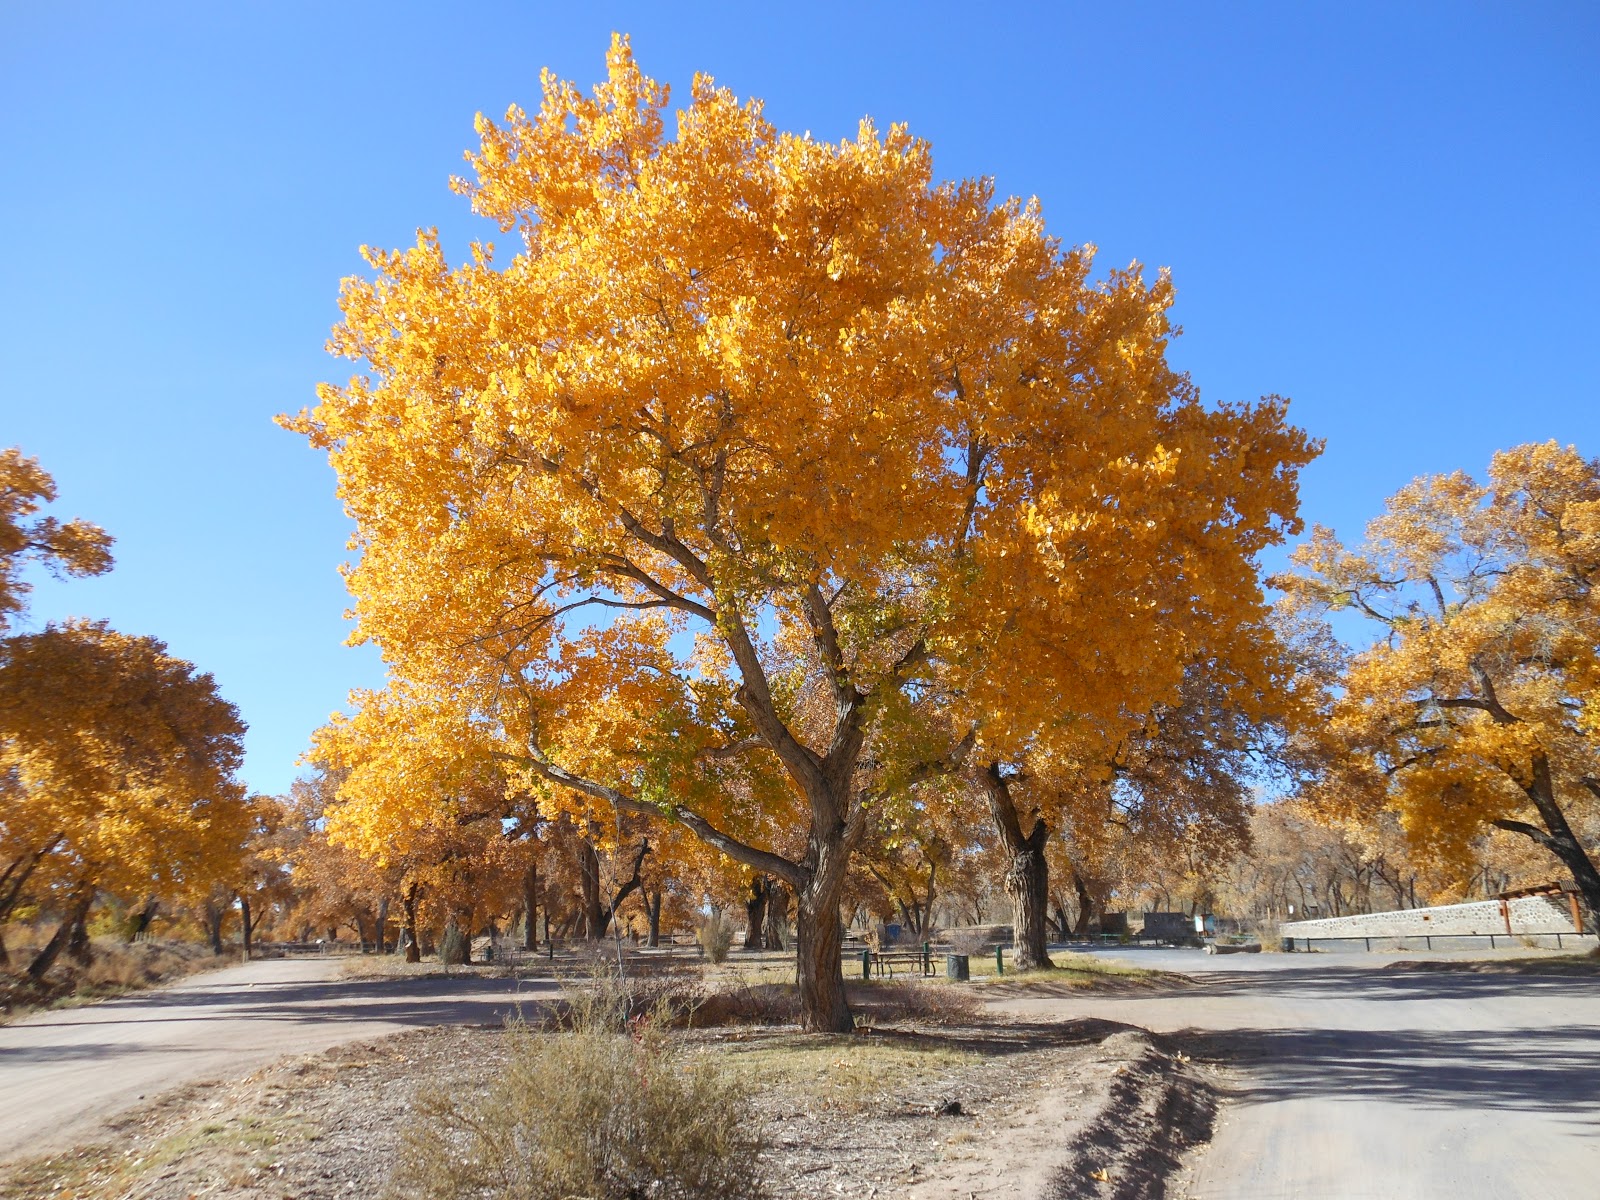 Download Trees That Please Nursery: Trees That Please Nursery: 30 Days of Fall Foliage, Tuesday November 6th.